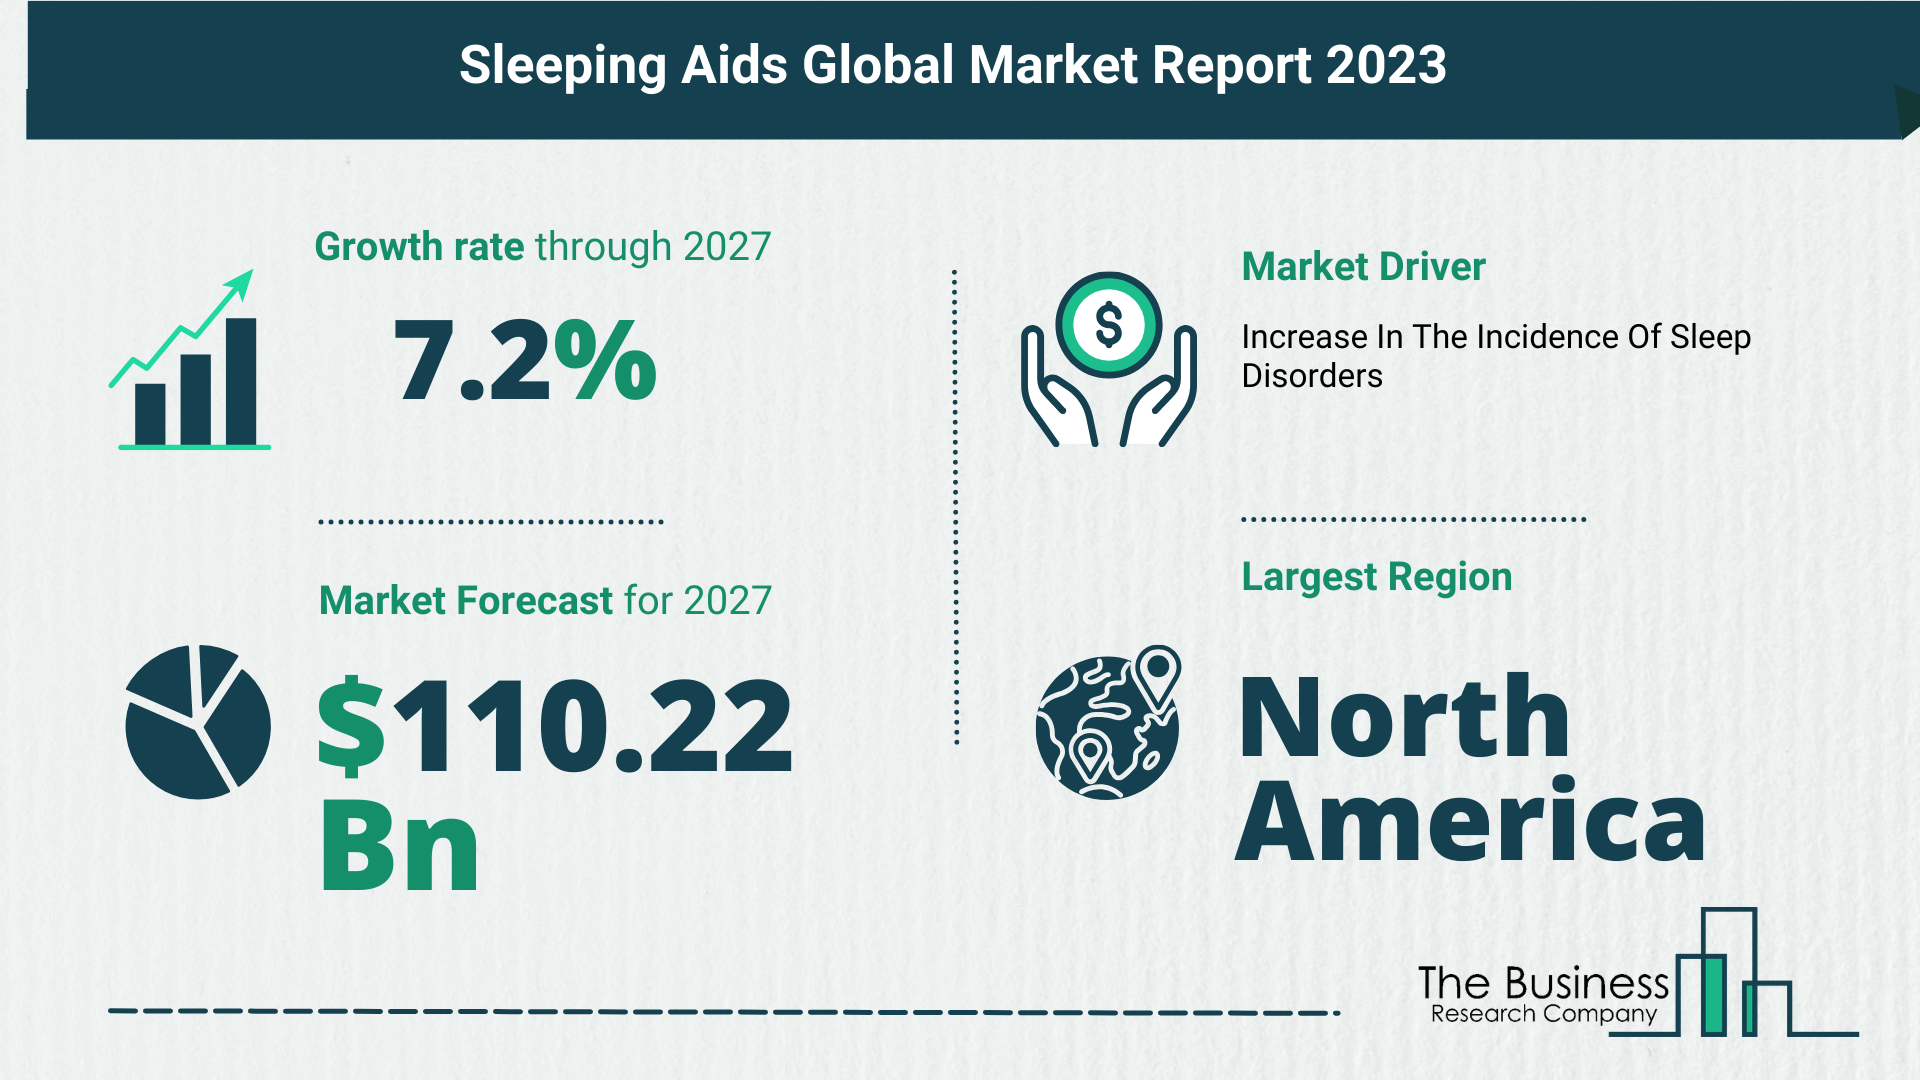 Key Trends And Drivers In The Sleeping Aids Market 2023